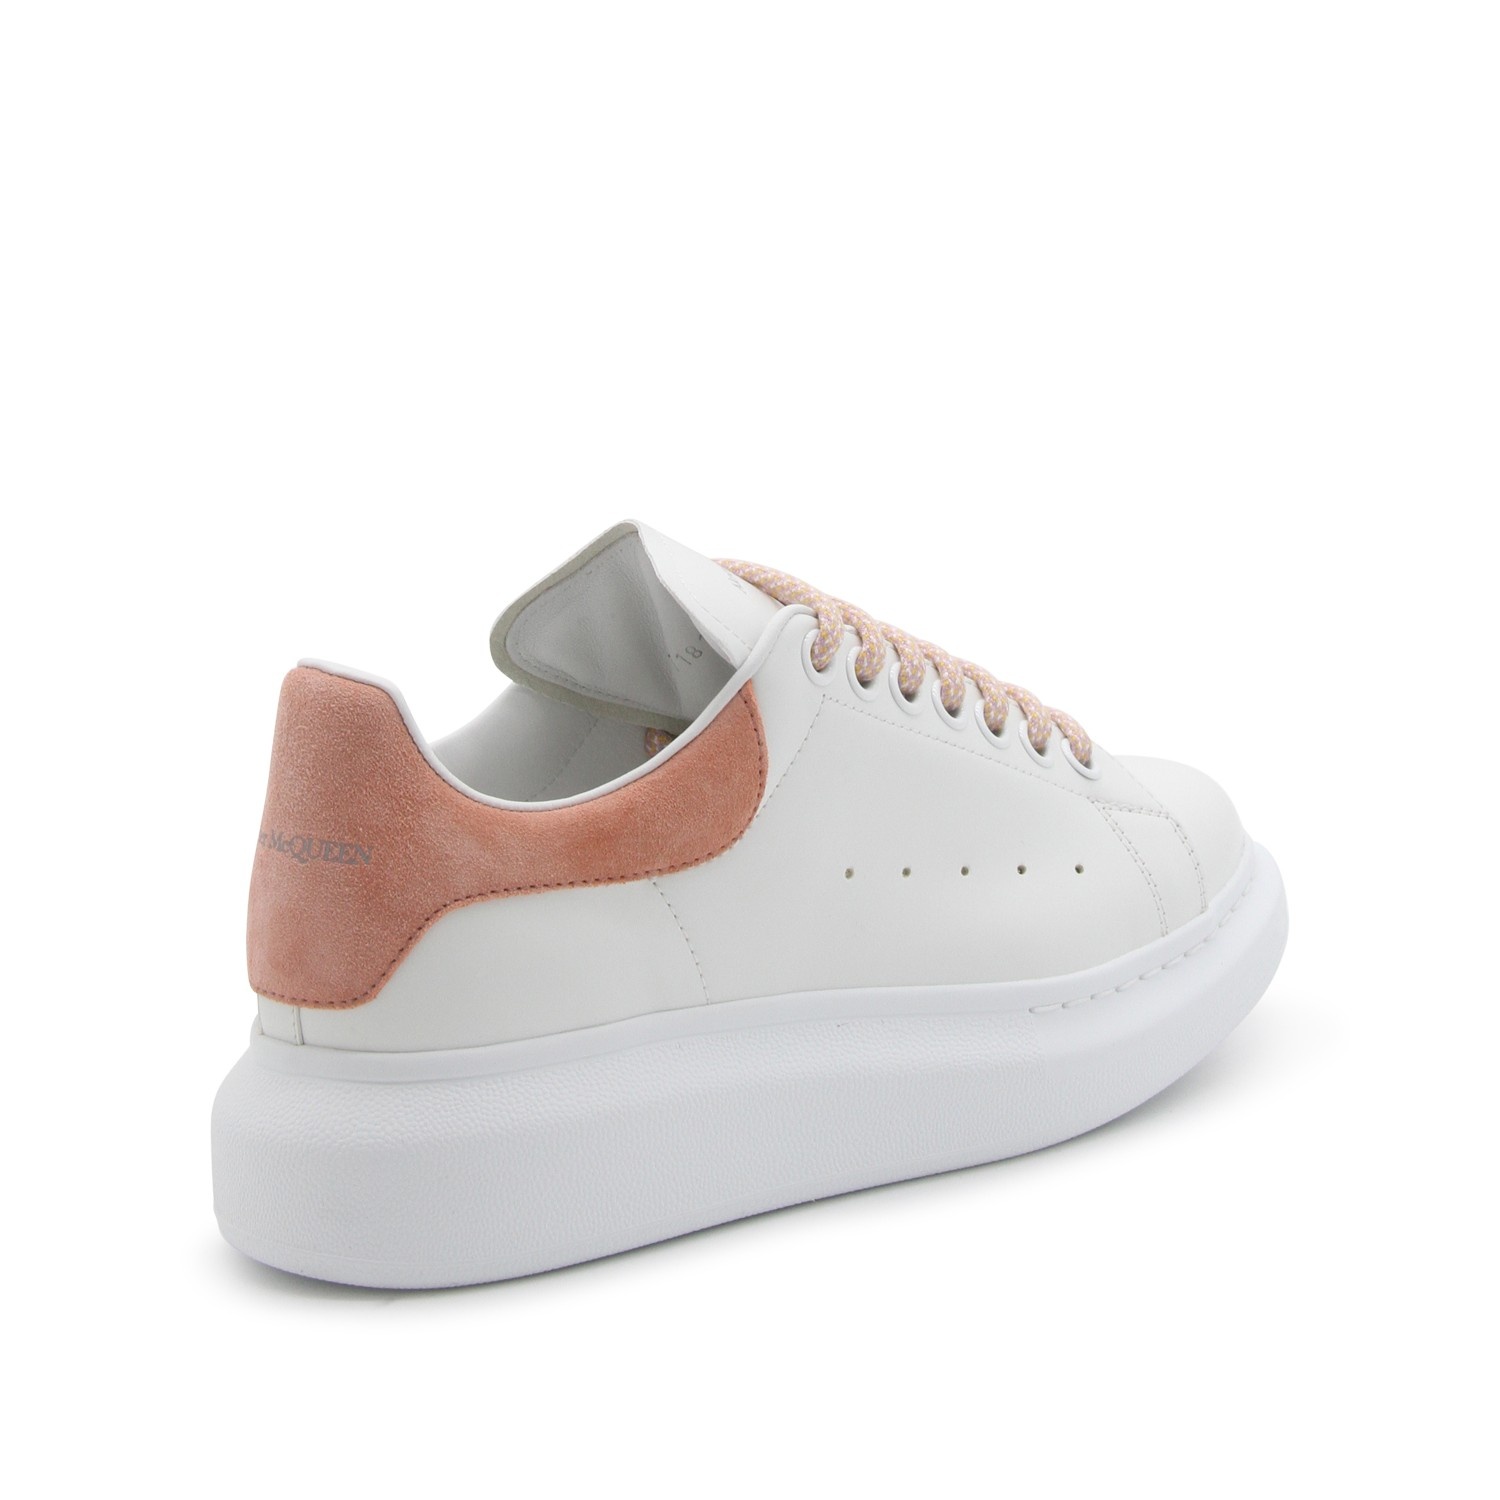 WHITE LEATHER AND PINK SUEDE OVERSIZED SNEAKERS - 6